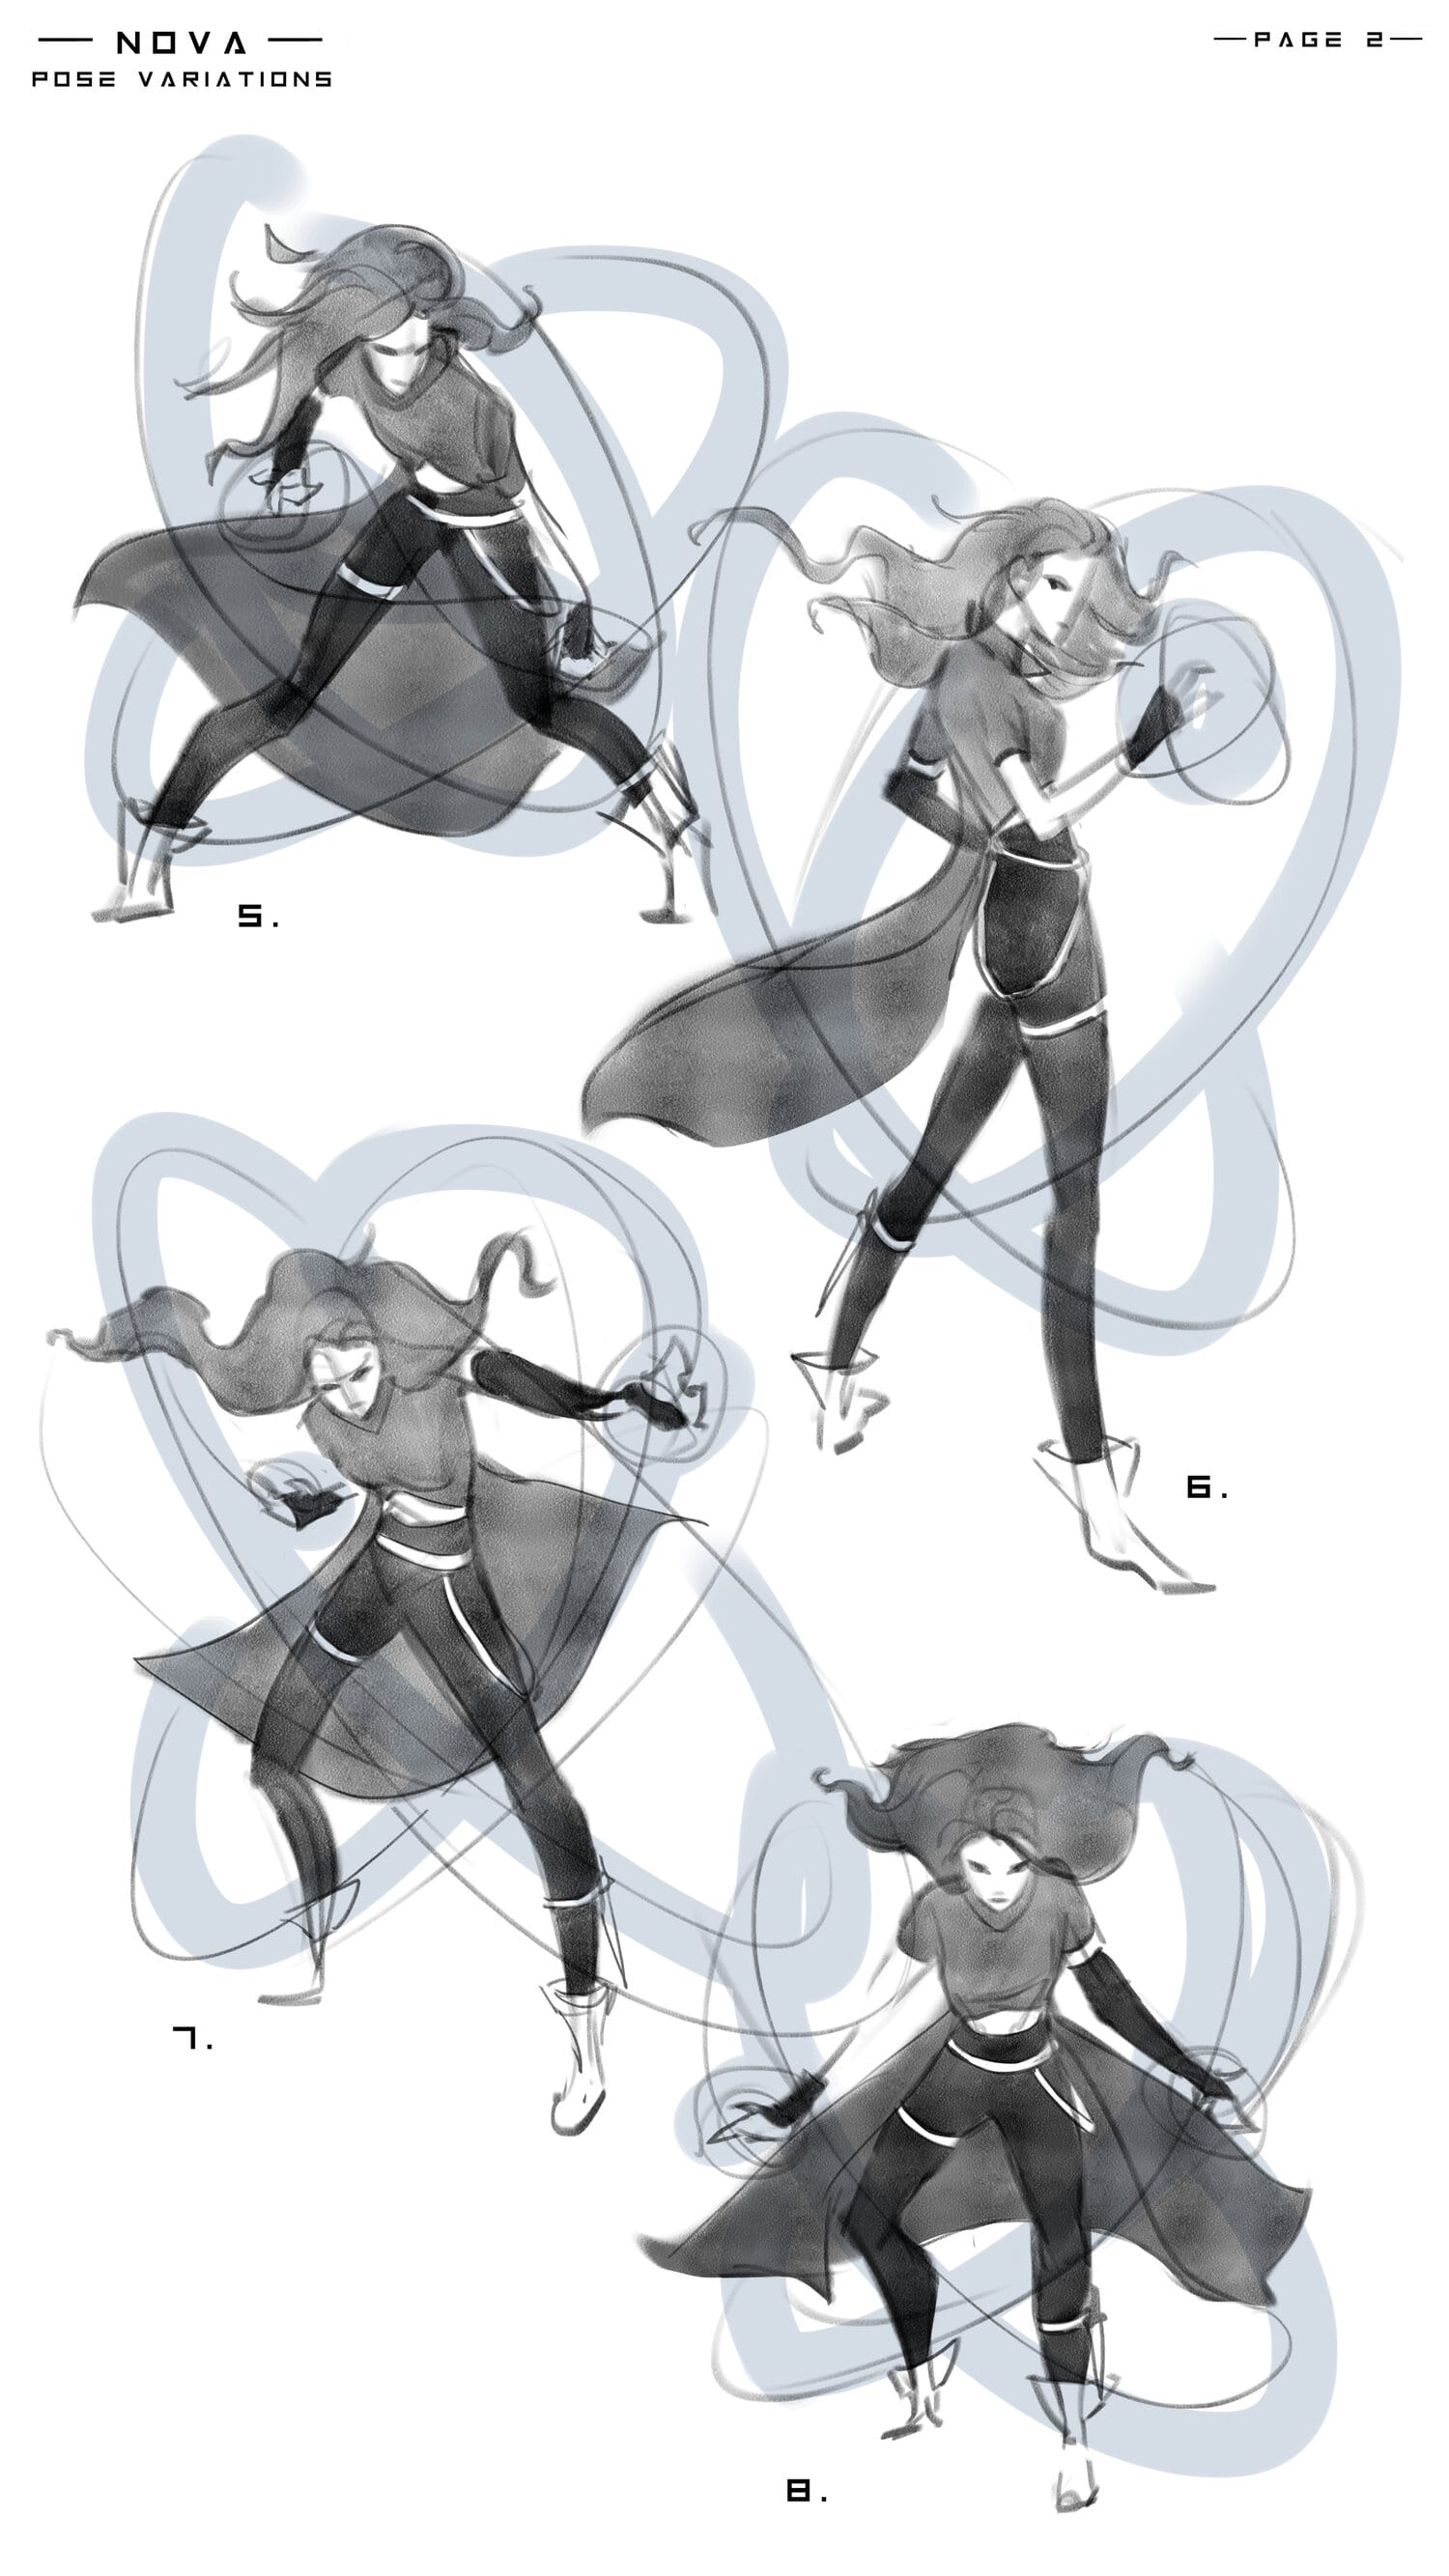 more sketches of poses